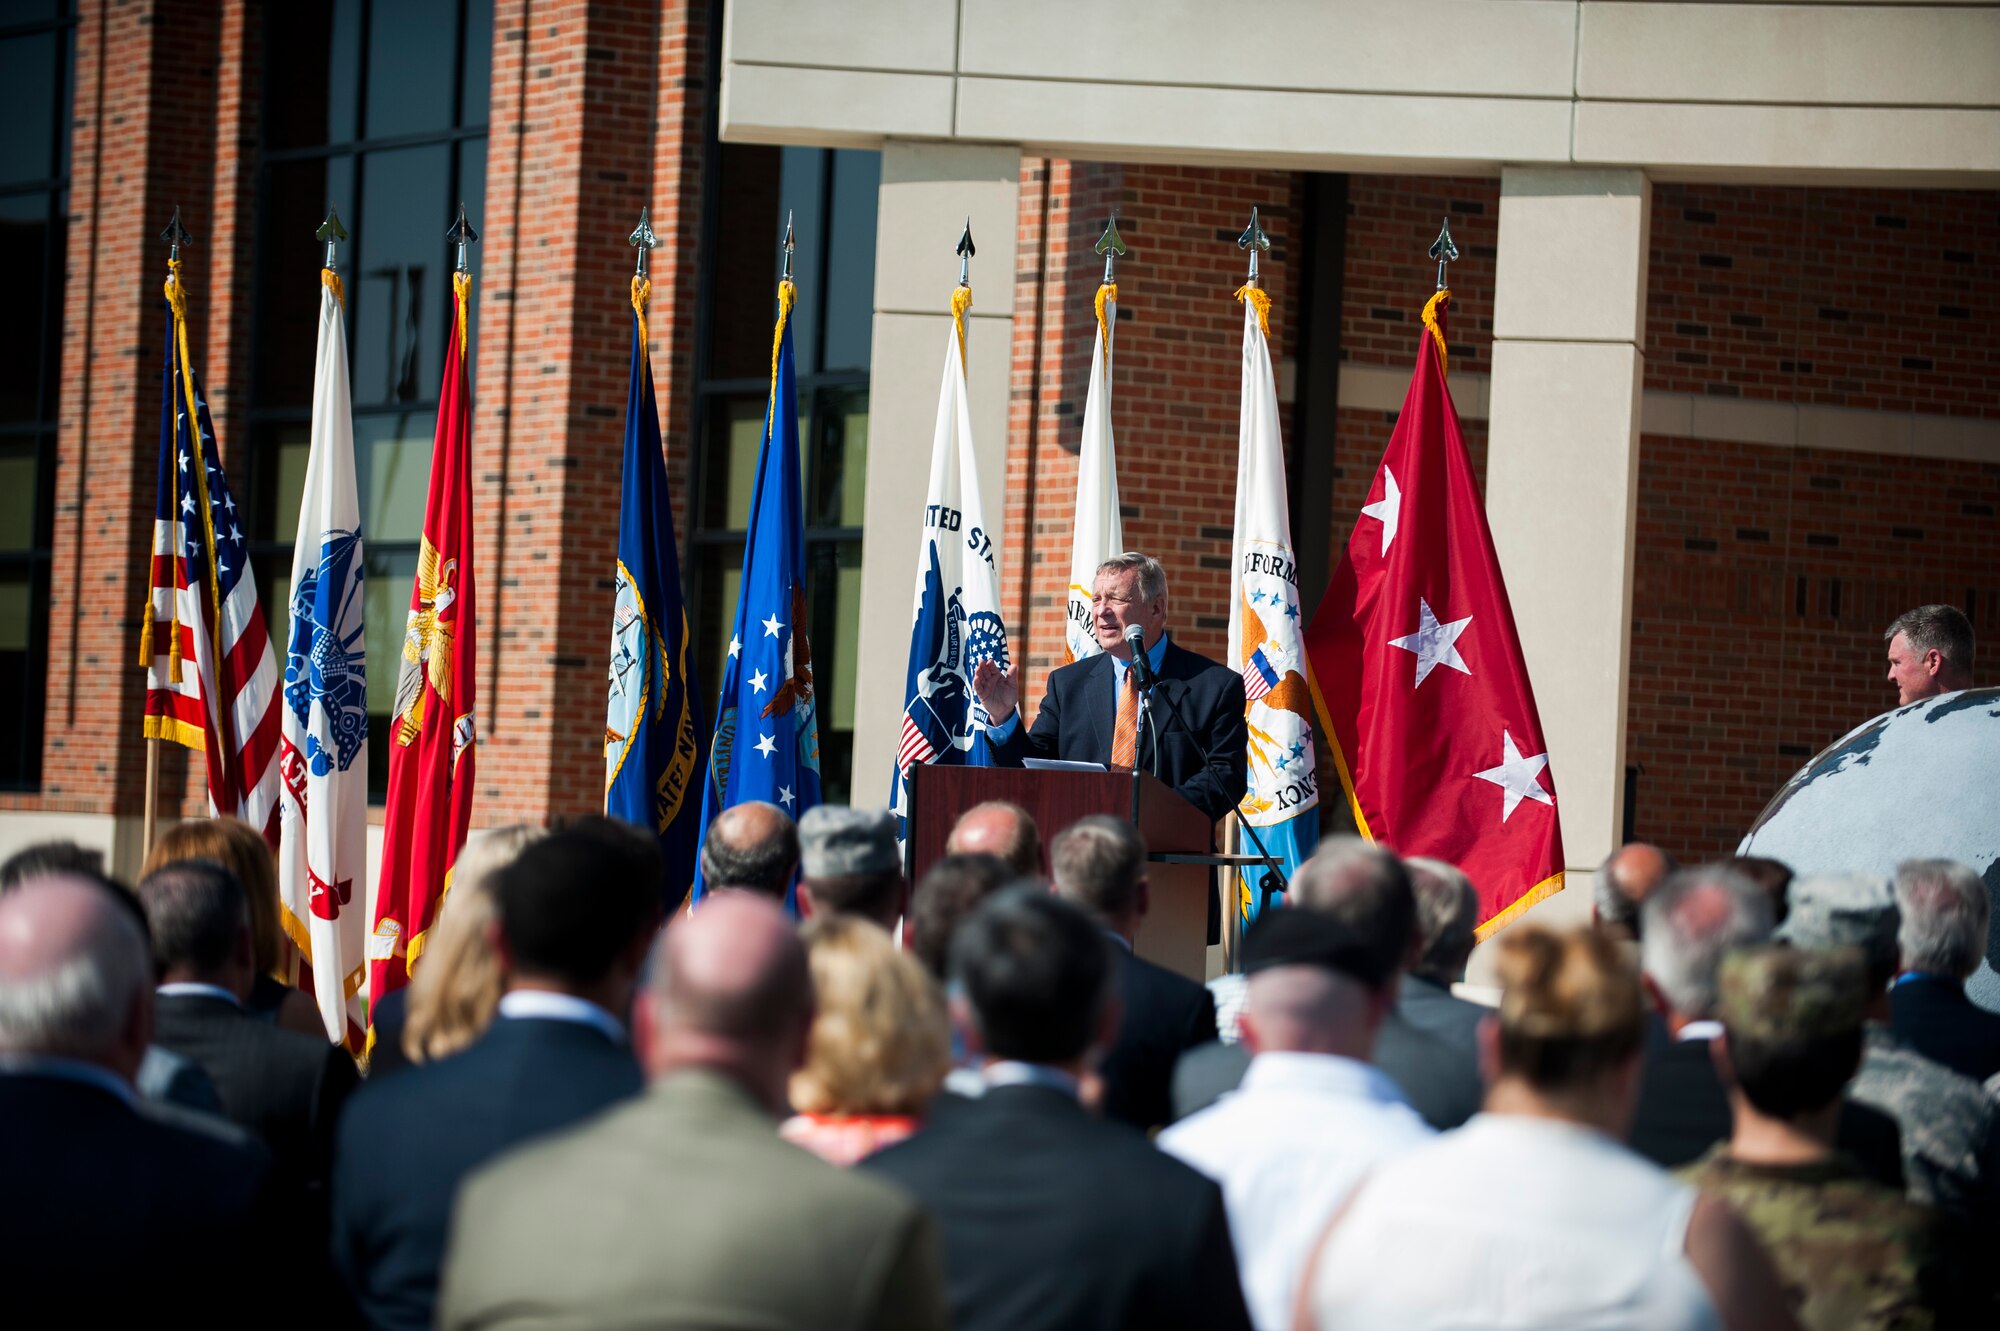 Sen. Dick Durbin delivers a speech during a ribbon cutting ceremony for the new Defense Information Systems Agency compound at Scott Air Force Base, Ill., Aug. 11, 2016. Civil leaders from across the state attended the opening of the state of the art compound. (U.S. Air Force photo by Staff Sgt. Clayton Lenhardt/Released)